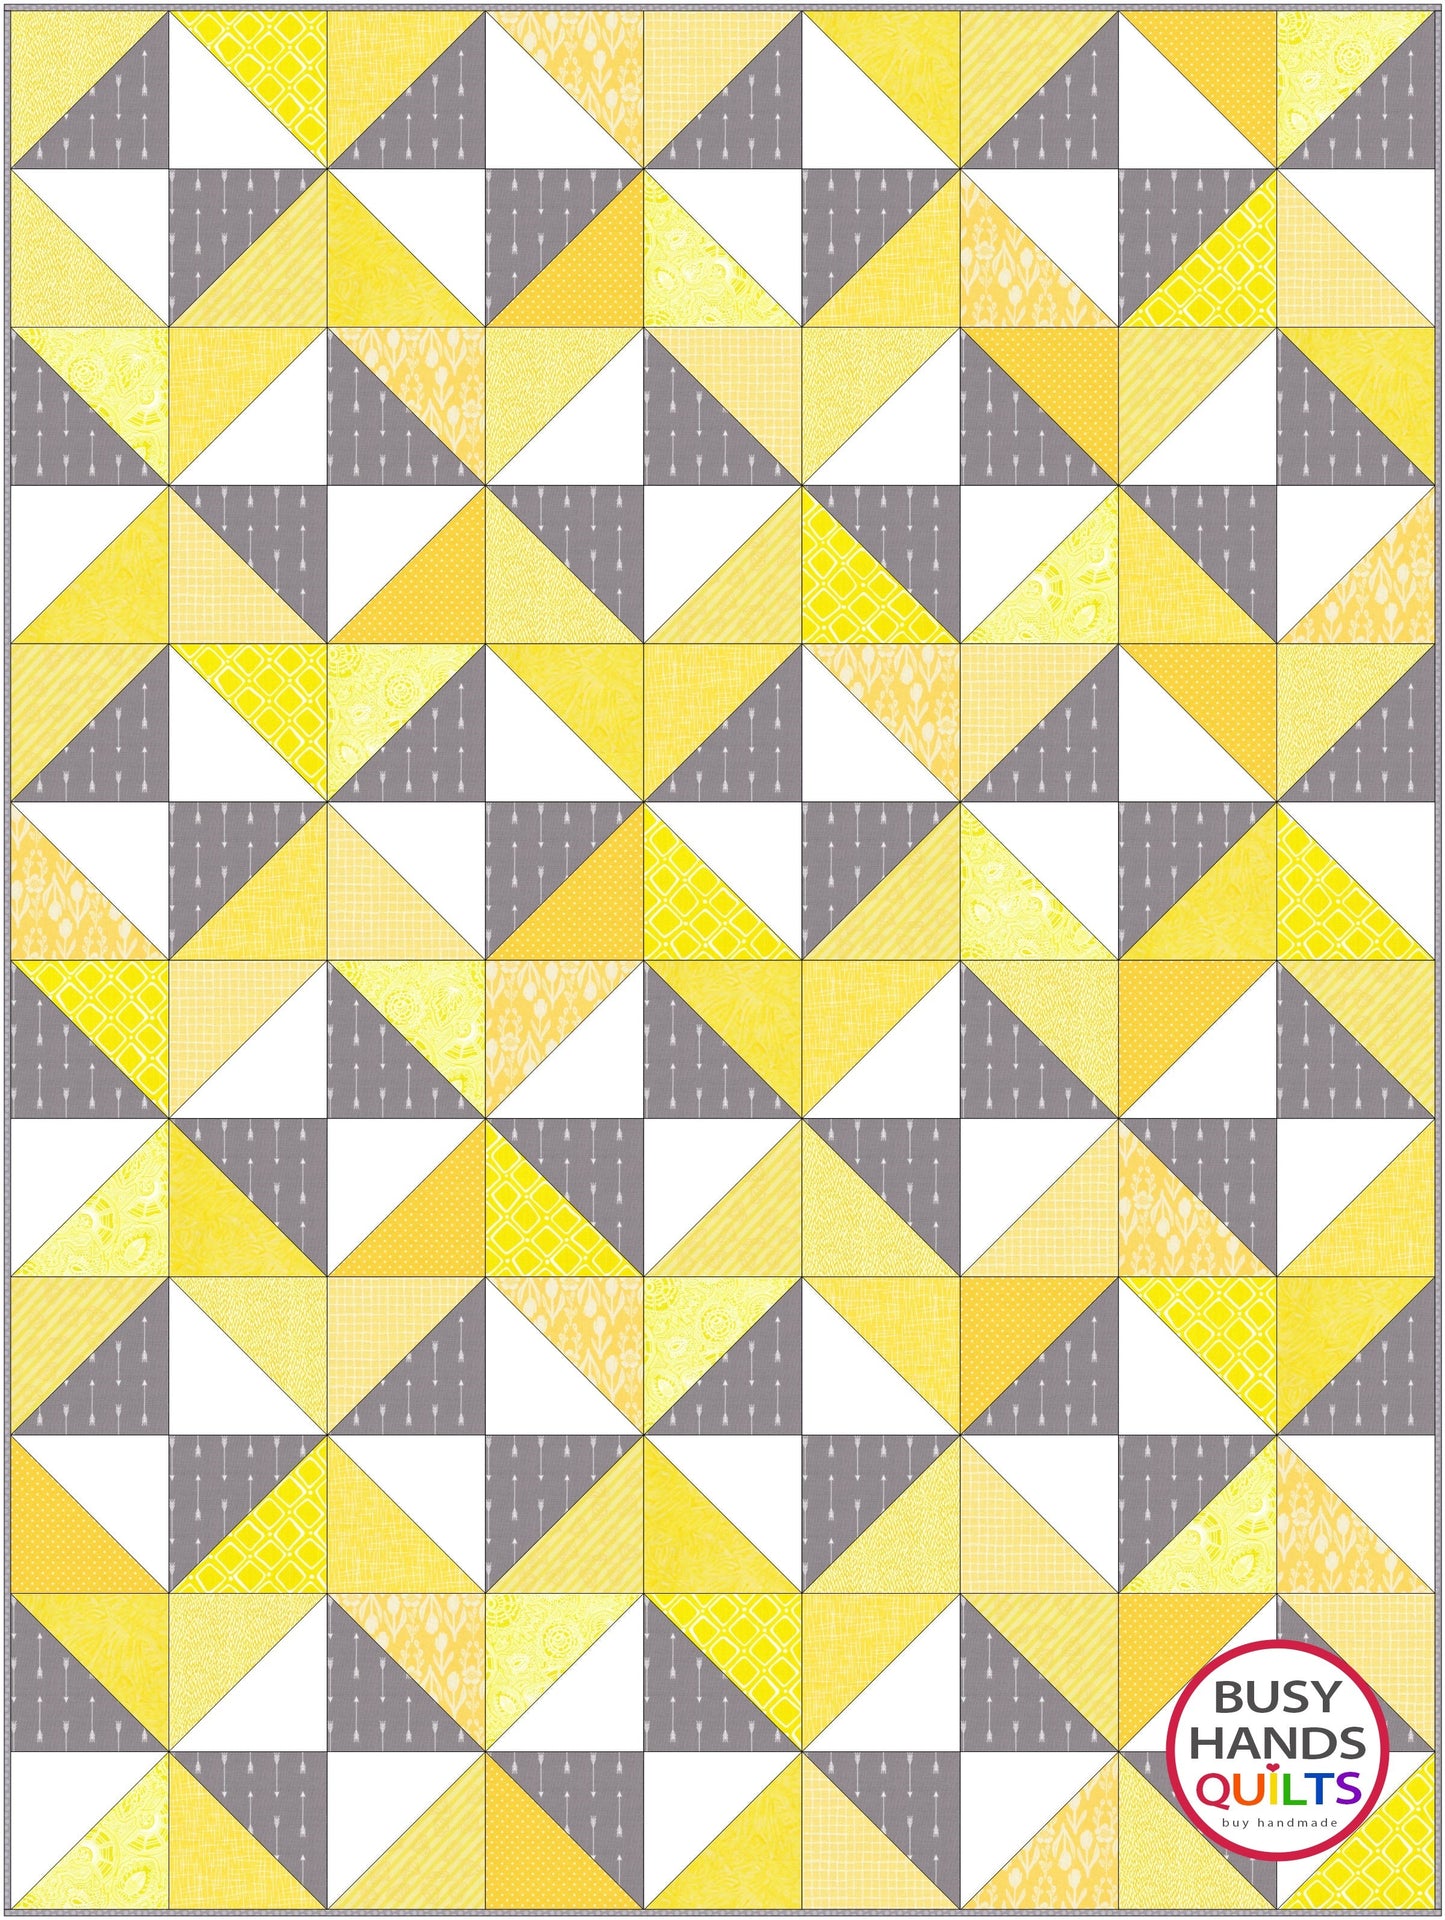 Summer Breeze Quilt Pattern PDF DOWNLOAD Busy Hands Quilts $12.99